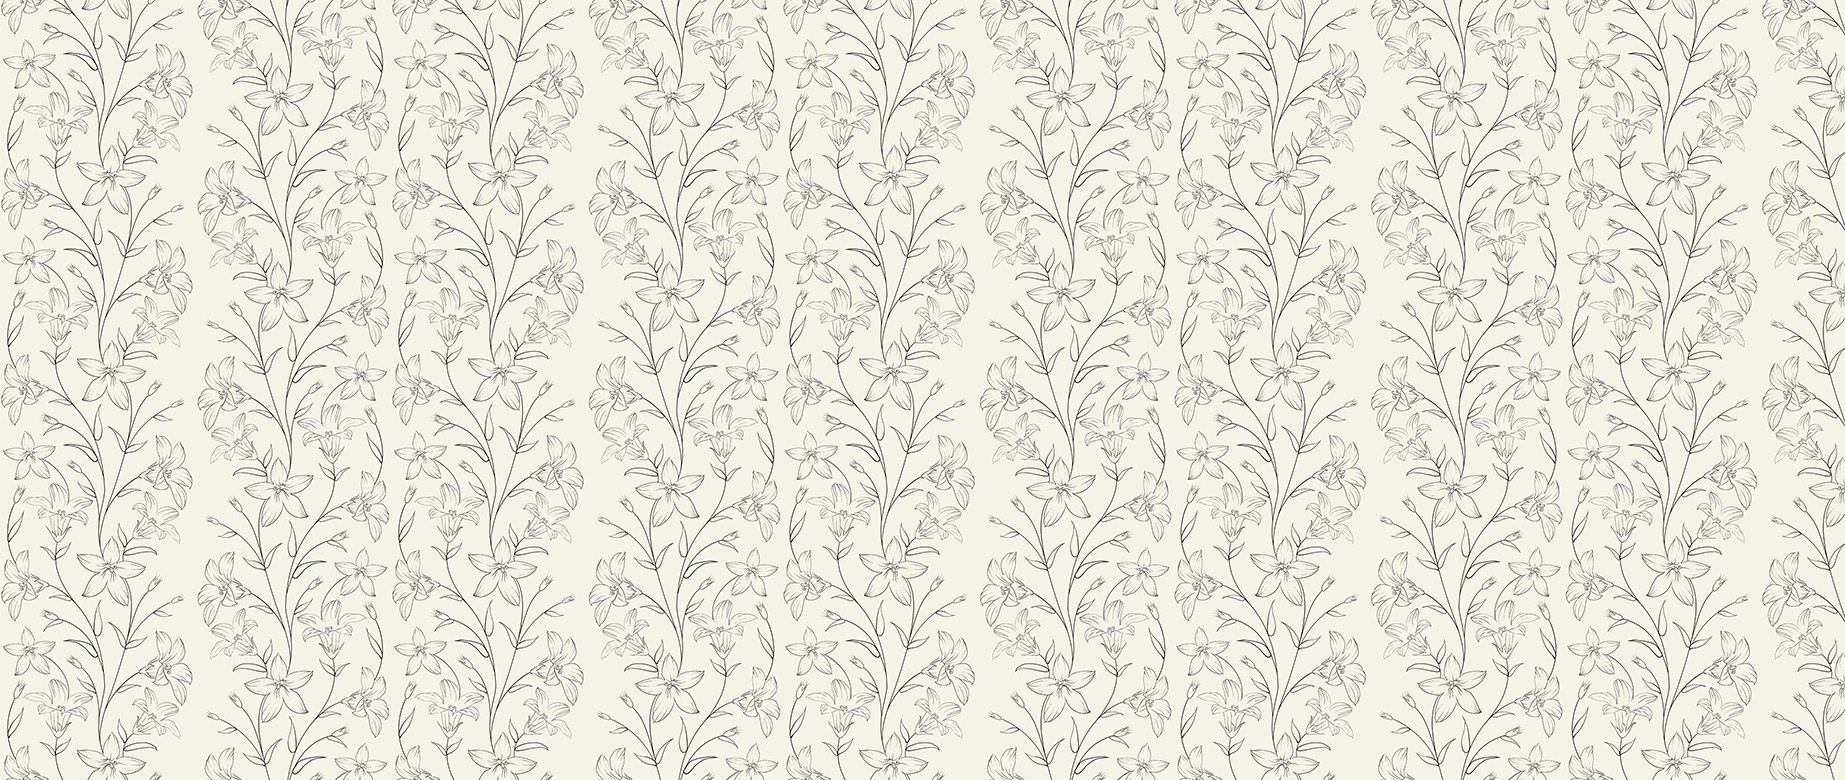 pencil-sketch-lilly-flower-pattern-wallpapers-full-wide-view